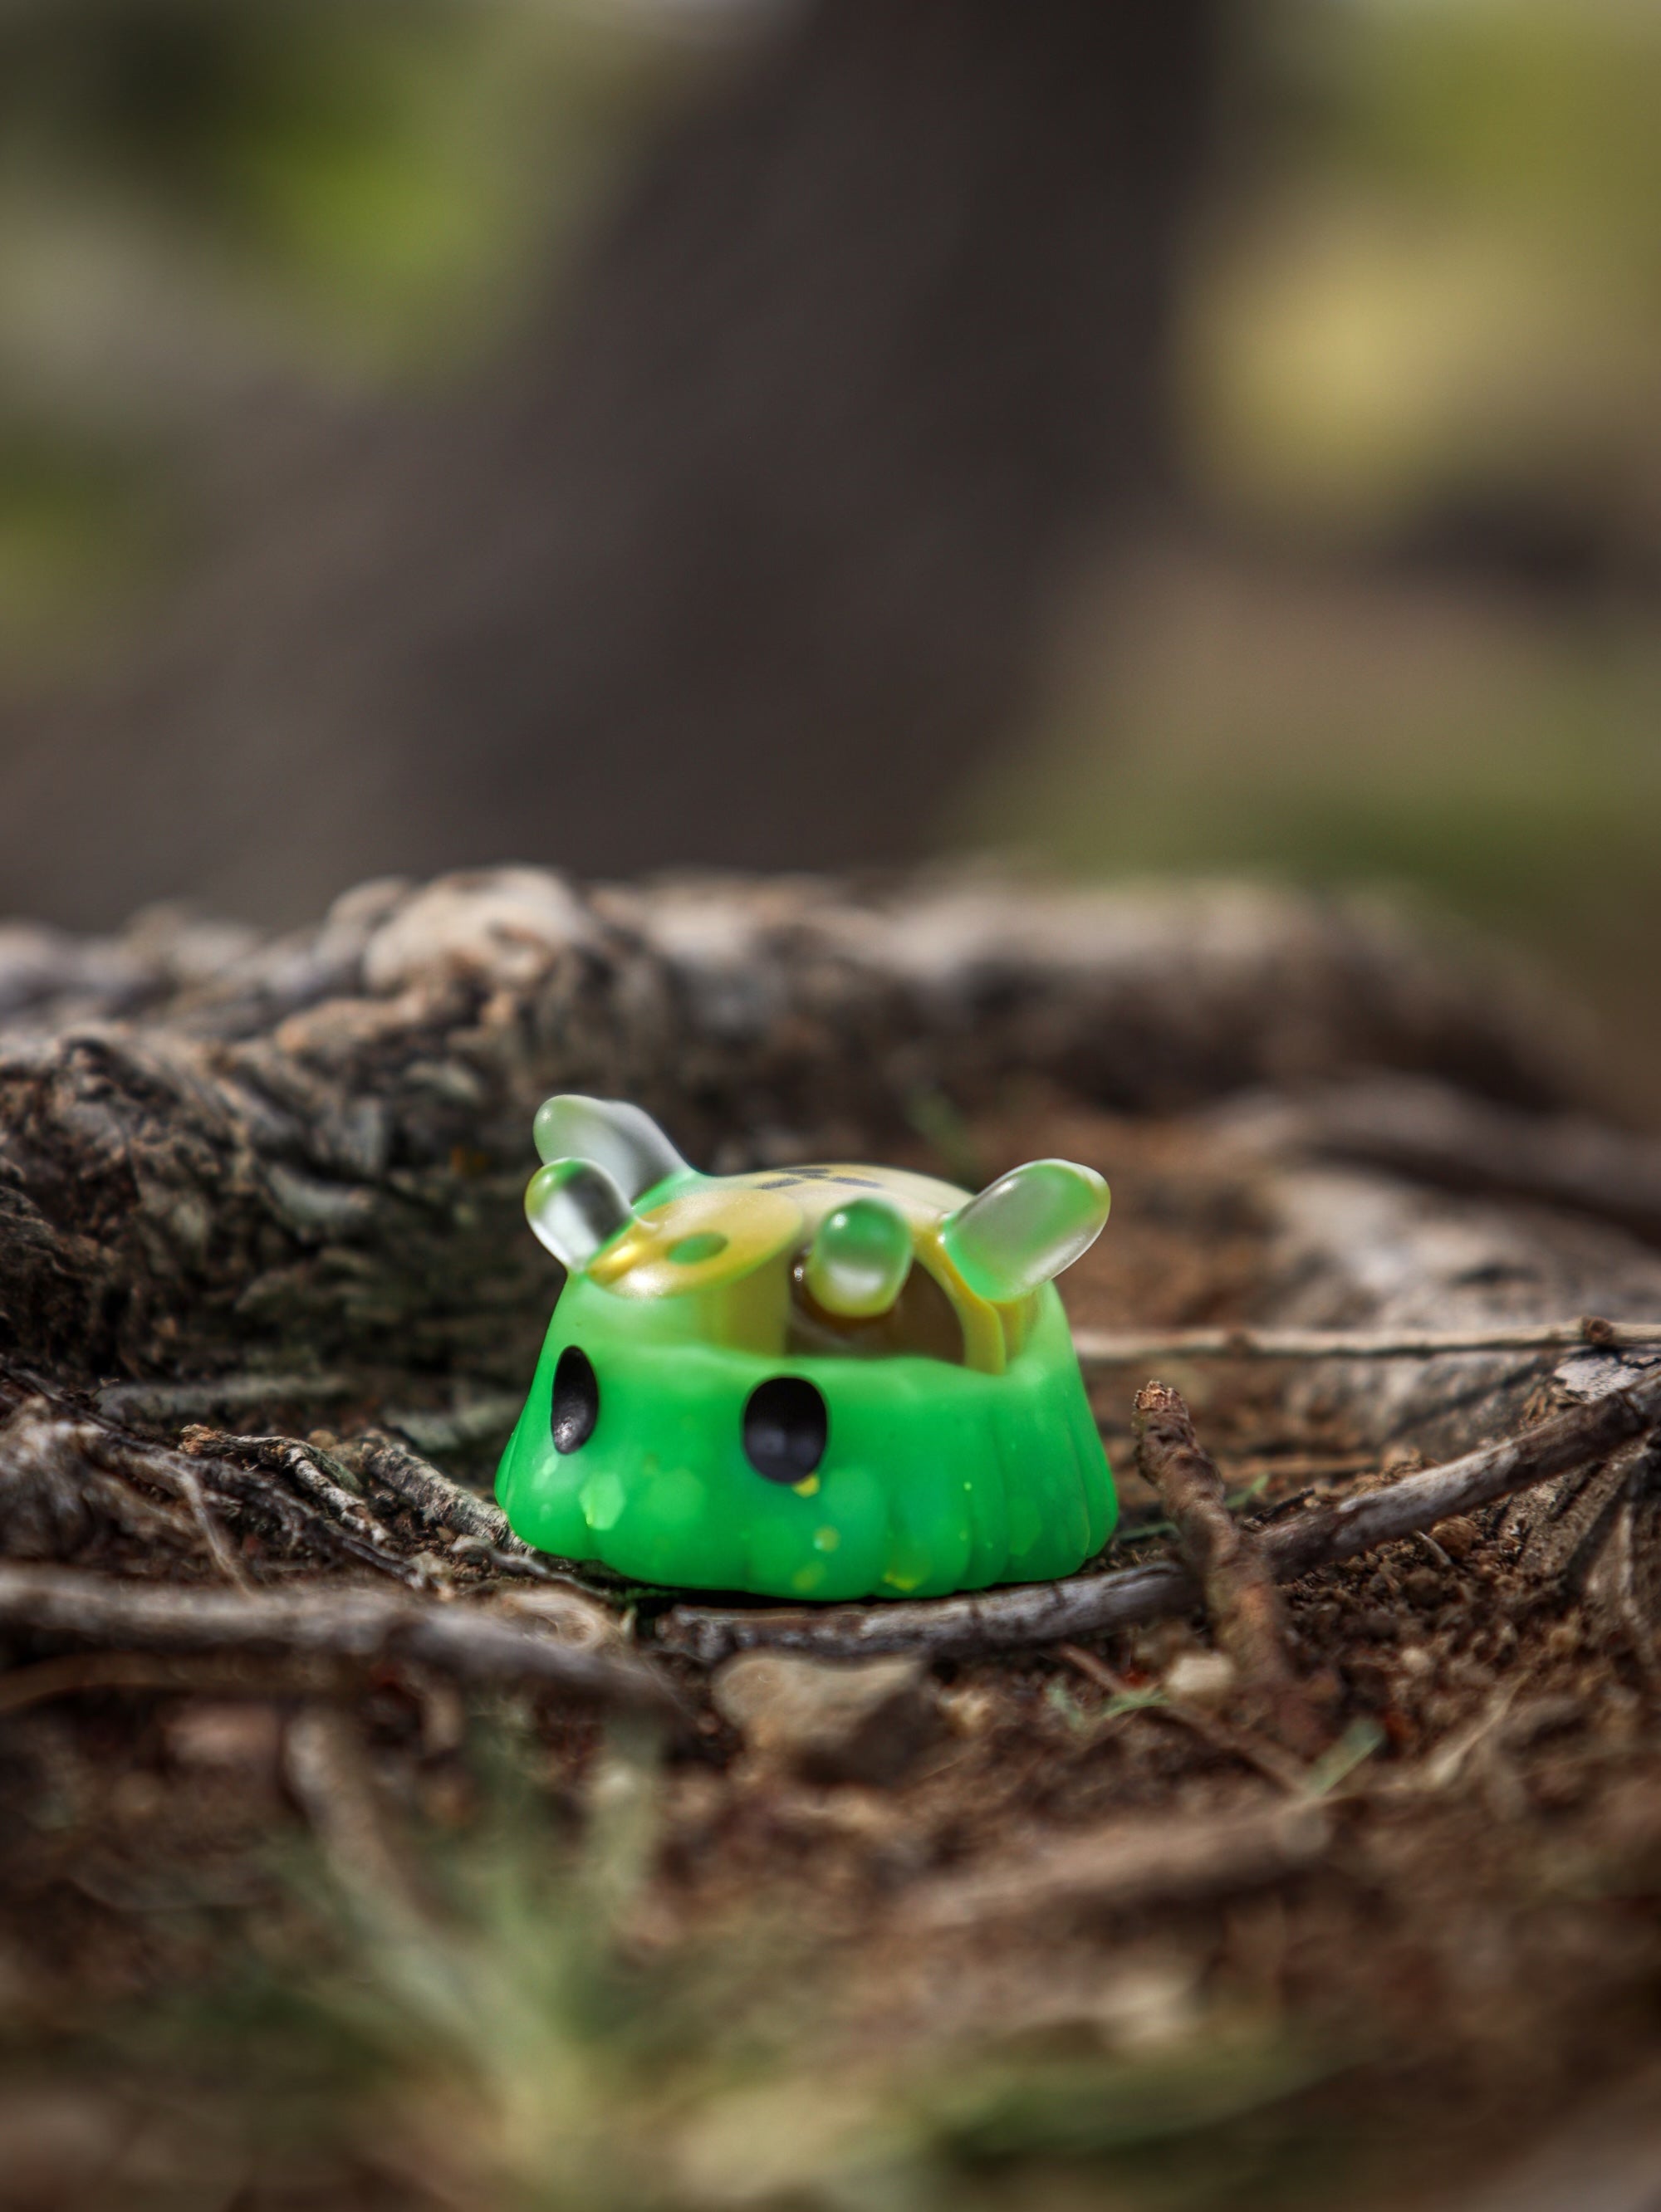 A whimsical green toy cube, like the Octopus Cube, from Fairies And Fancies' GRUBLETS collection at Strangecat Toys. Made of Polymer Clay and Resin.